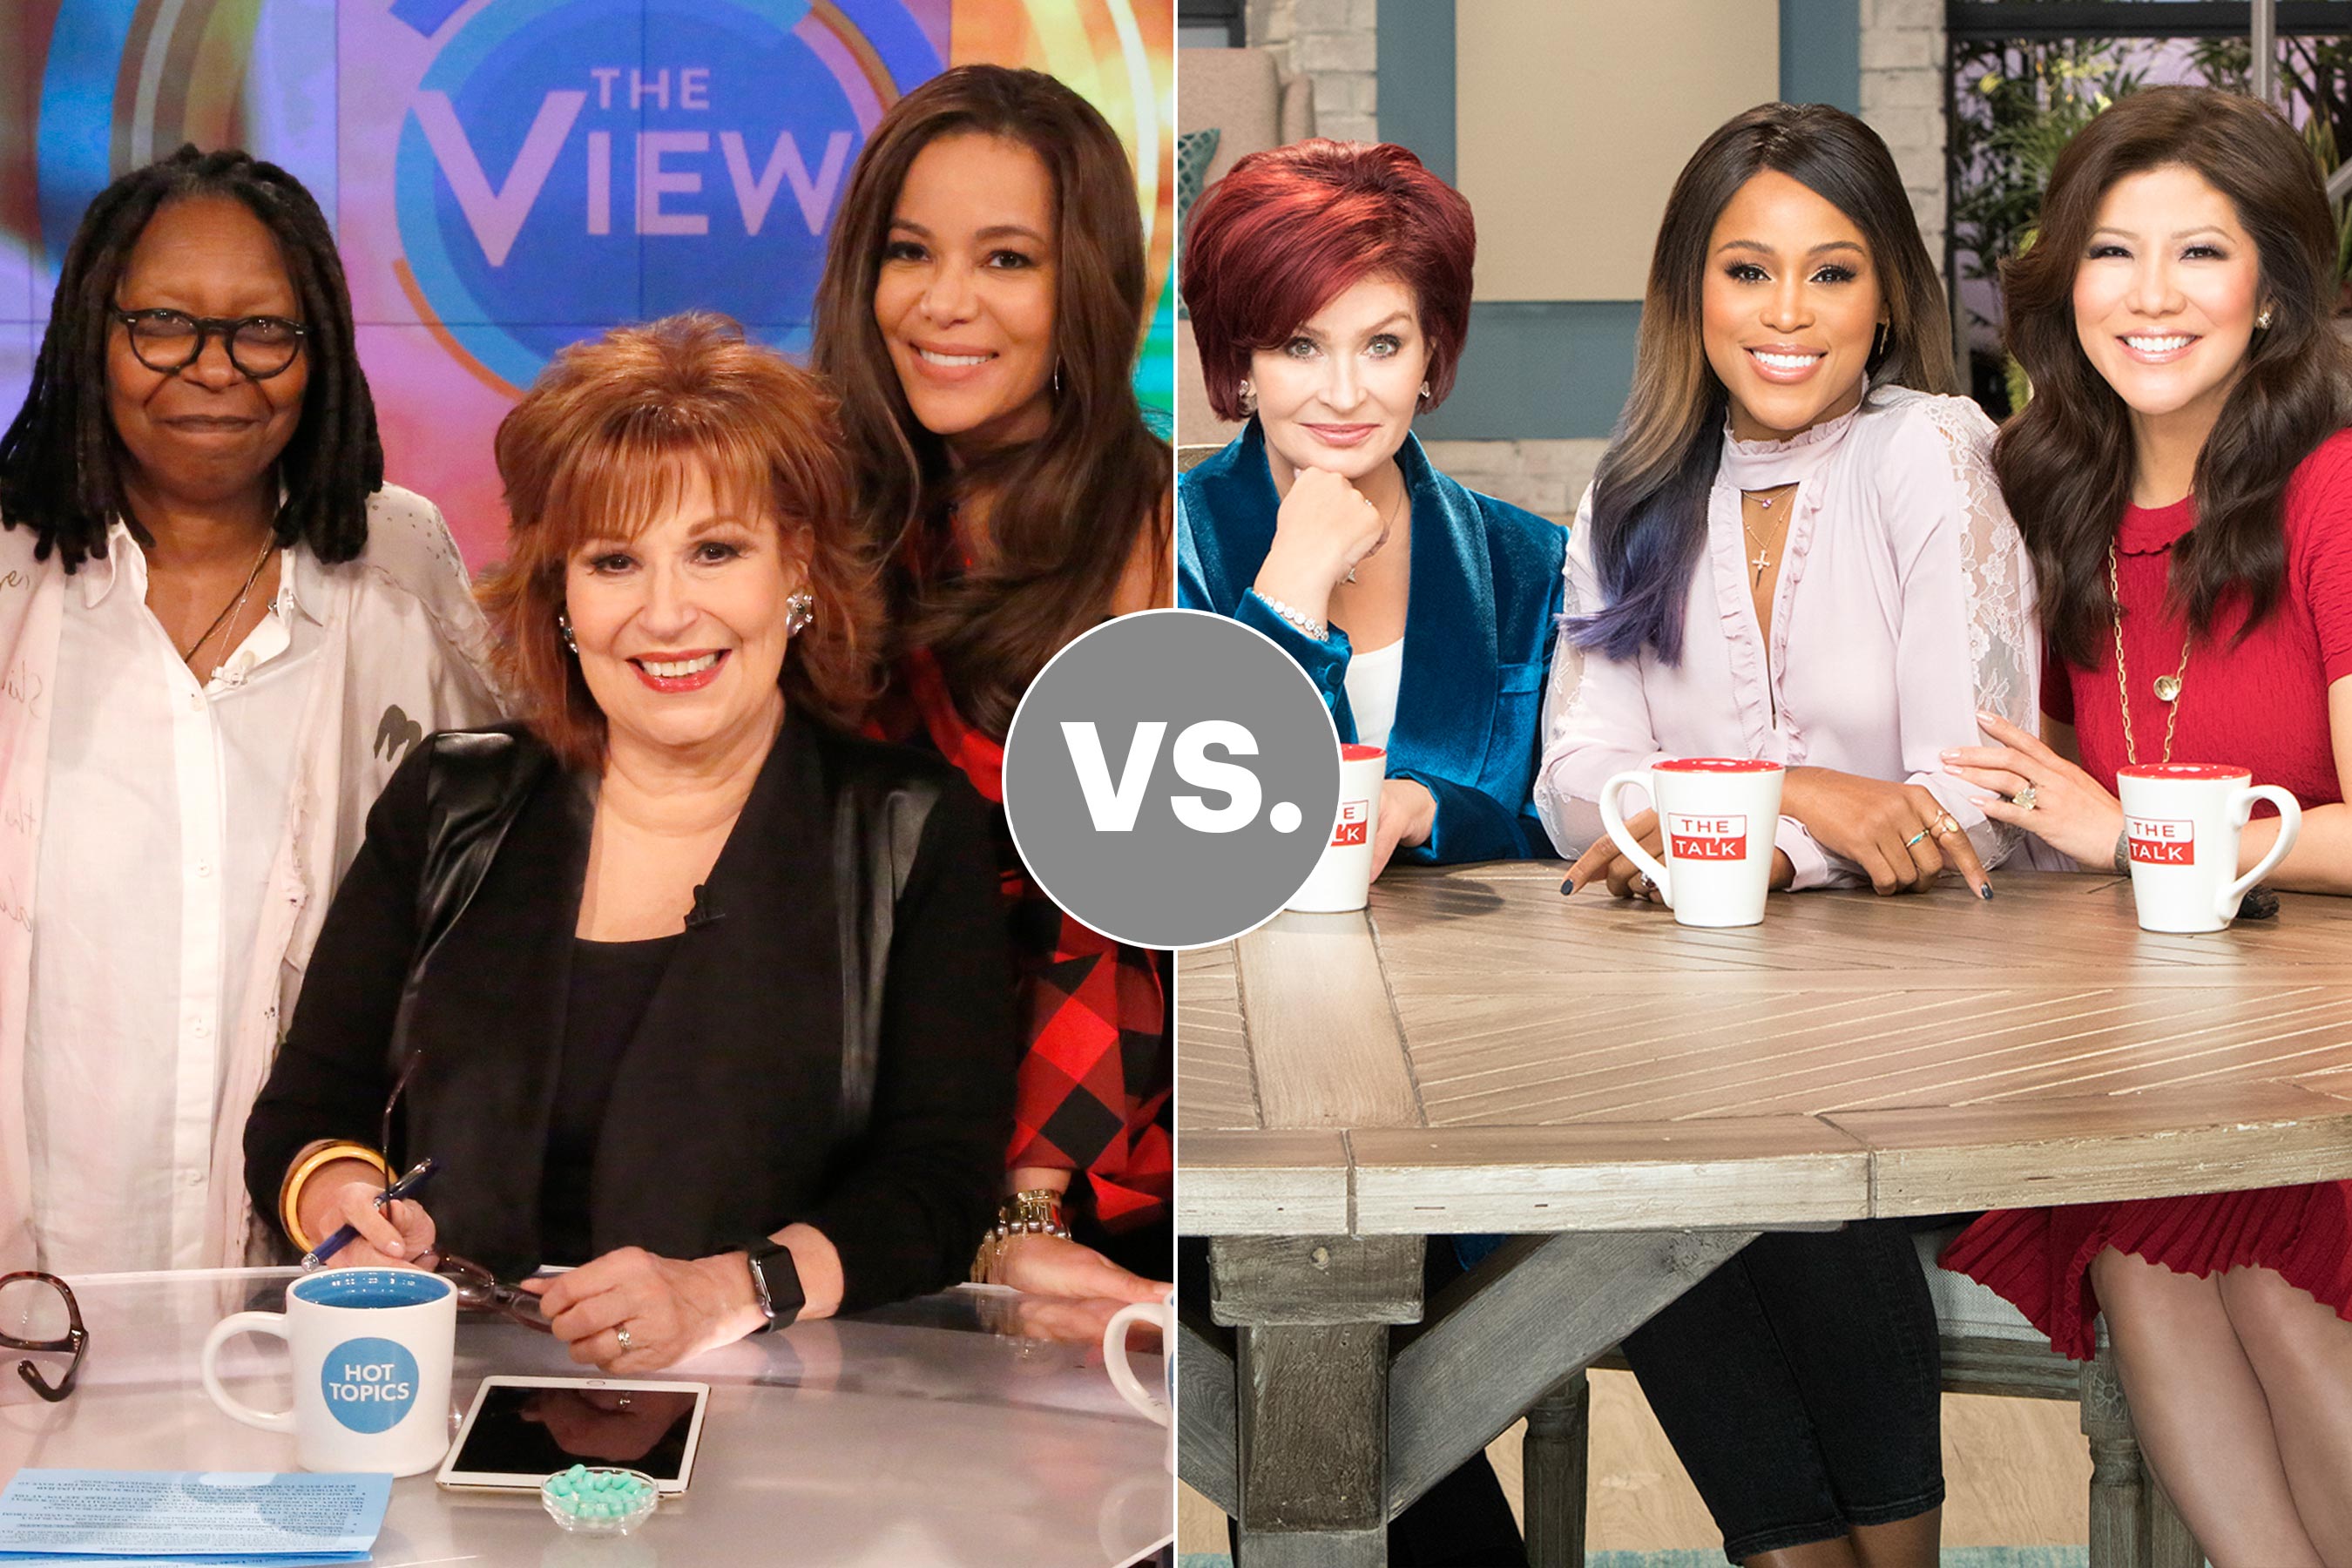 The View vs. The Talk: Which is better? | EW.com